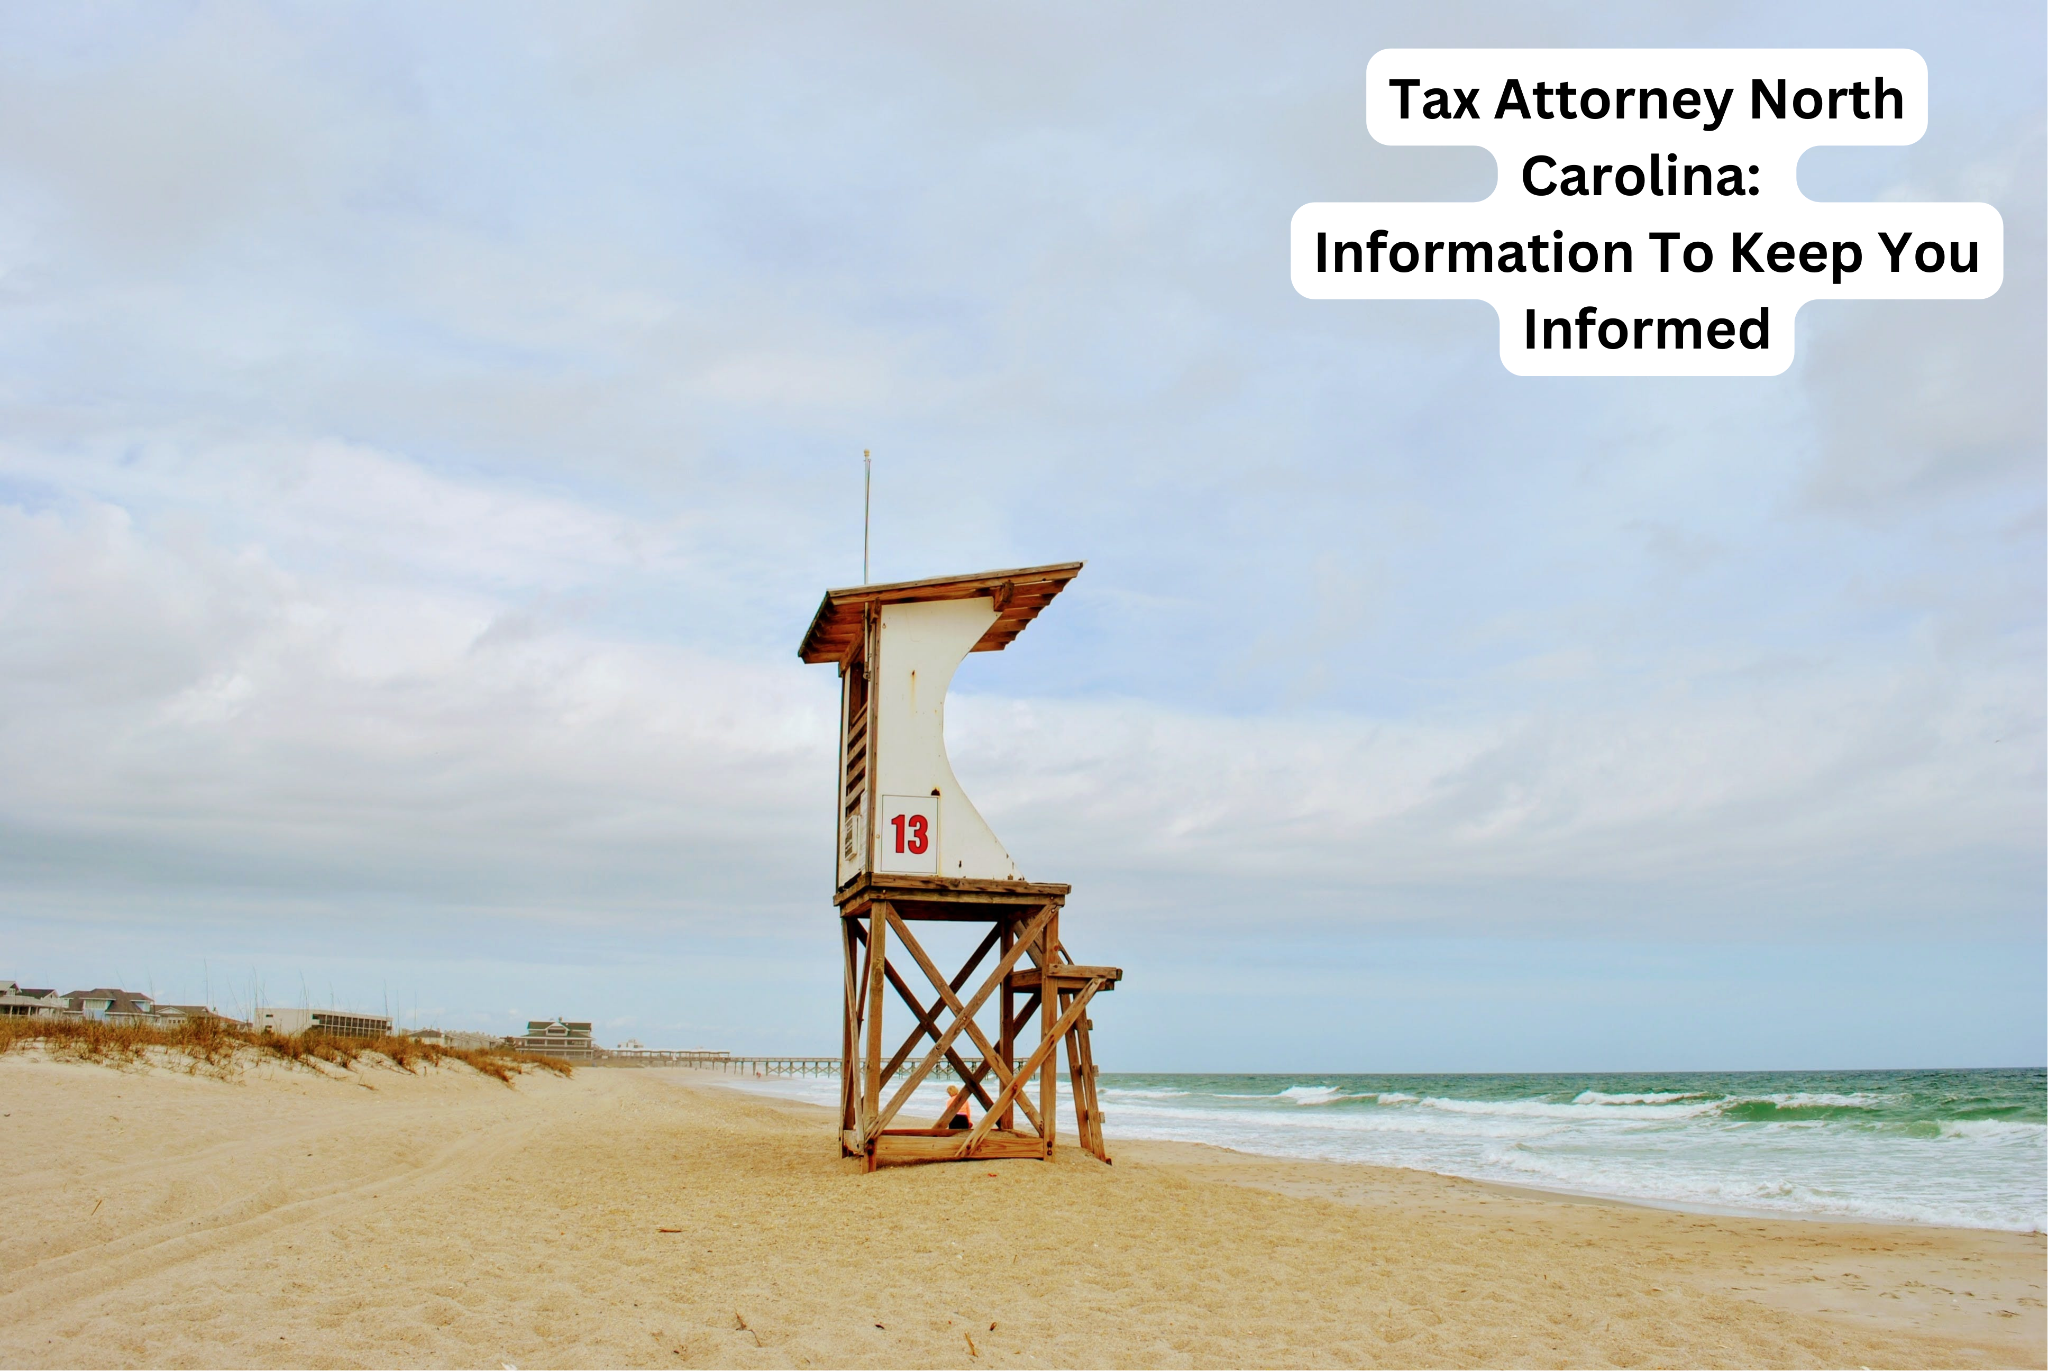 Tax Attorney North Carolina: Information To Keep You Informed